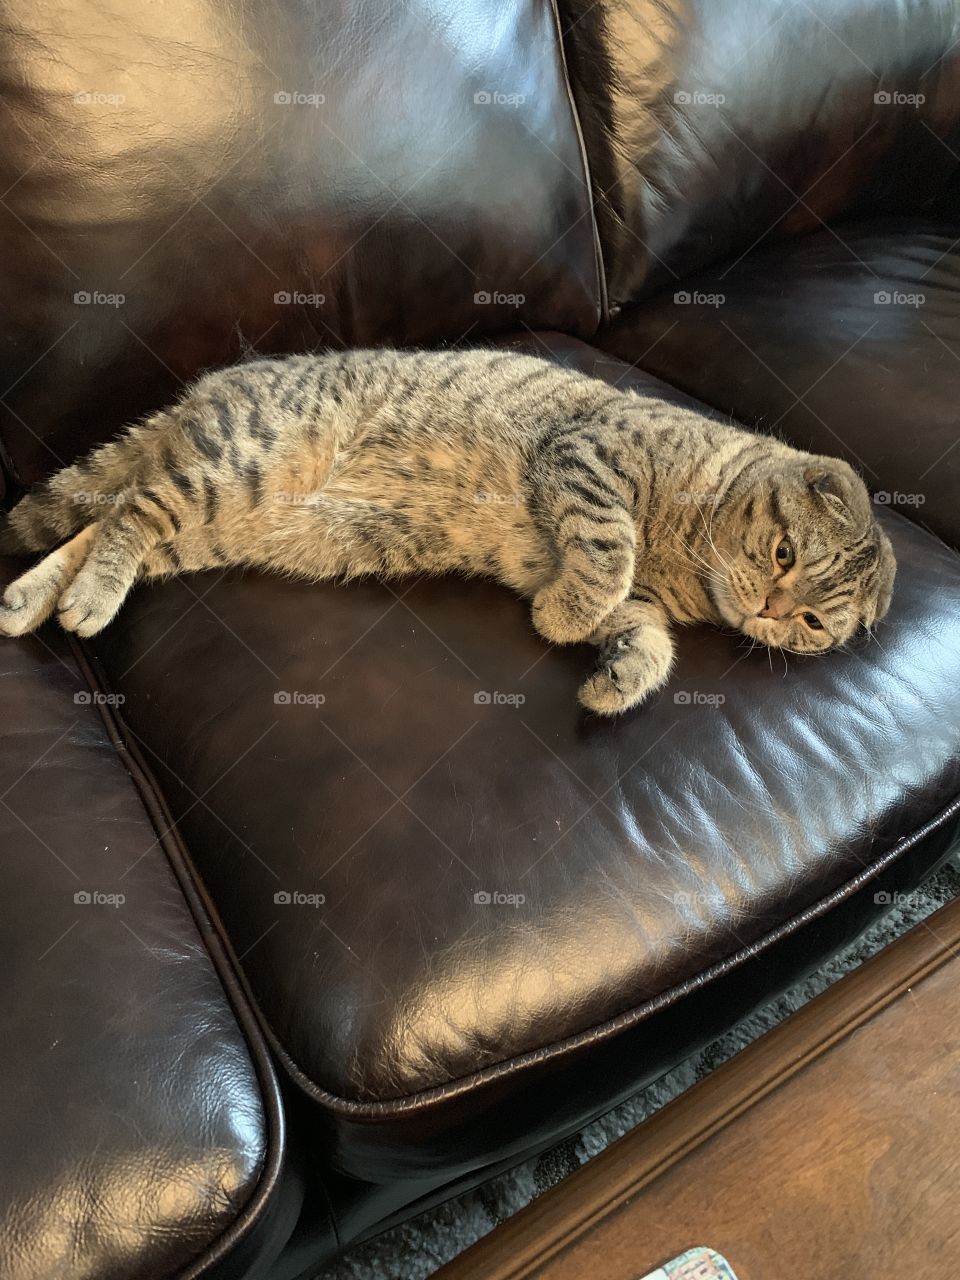 Our Tiger cat relaxing